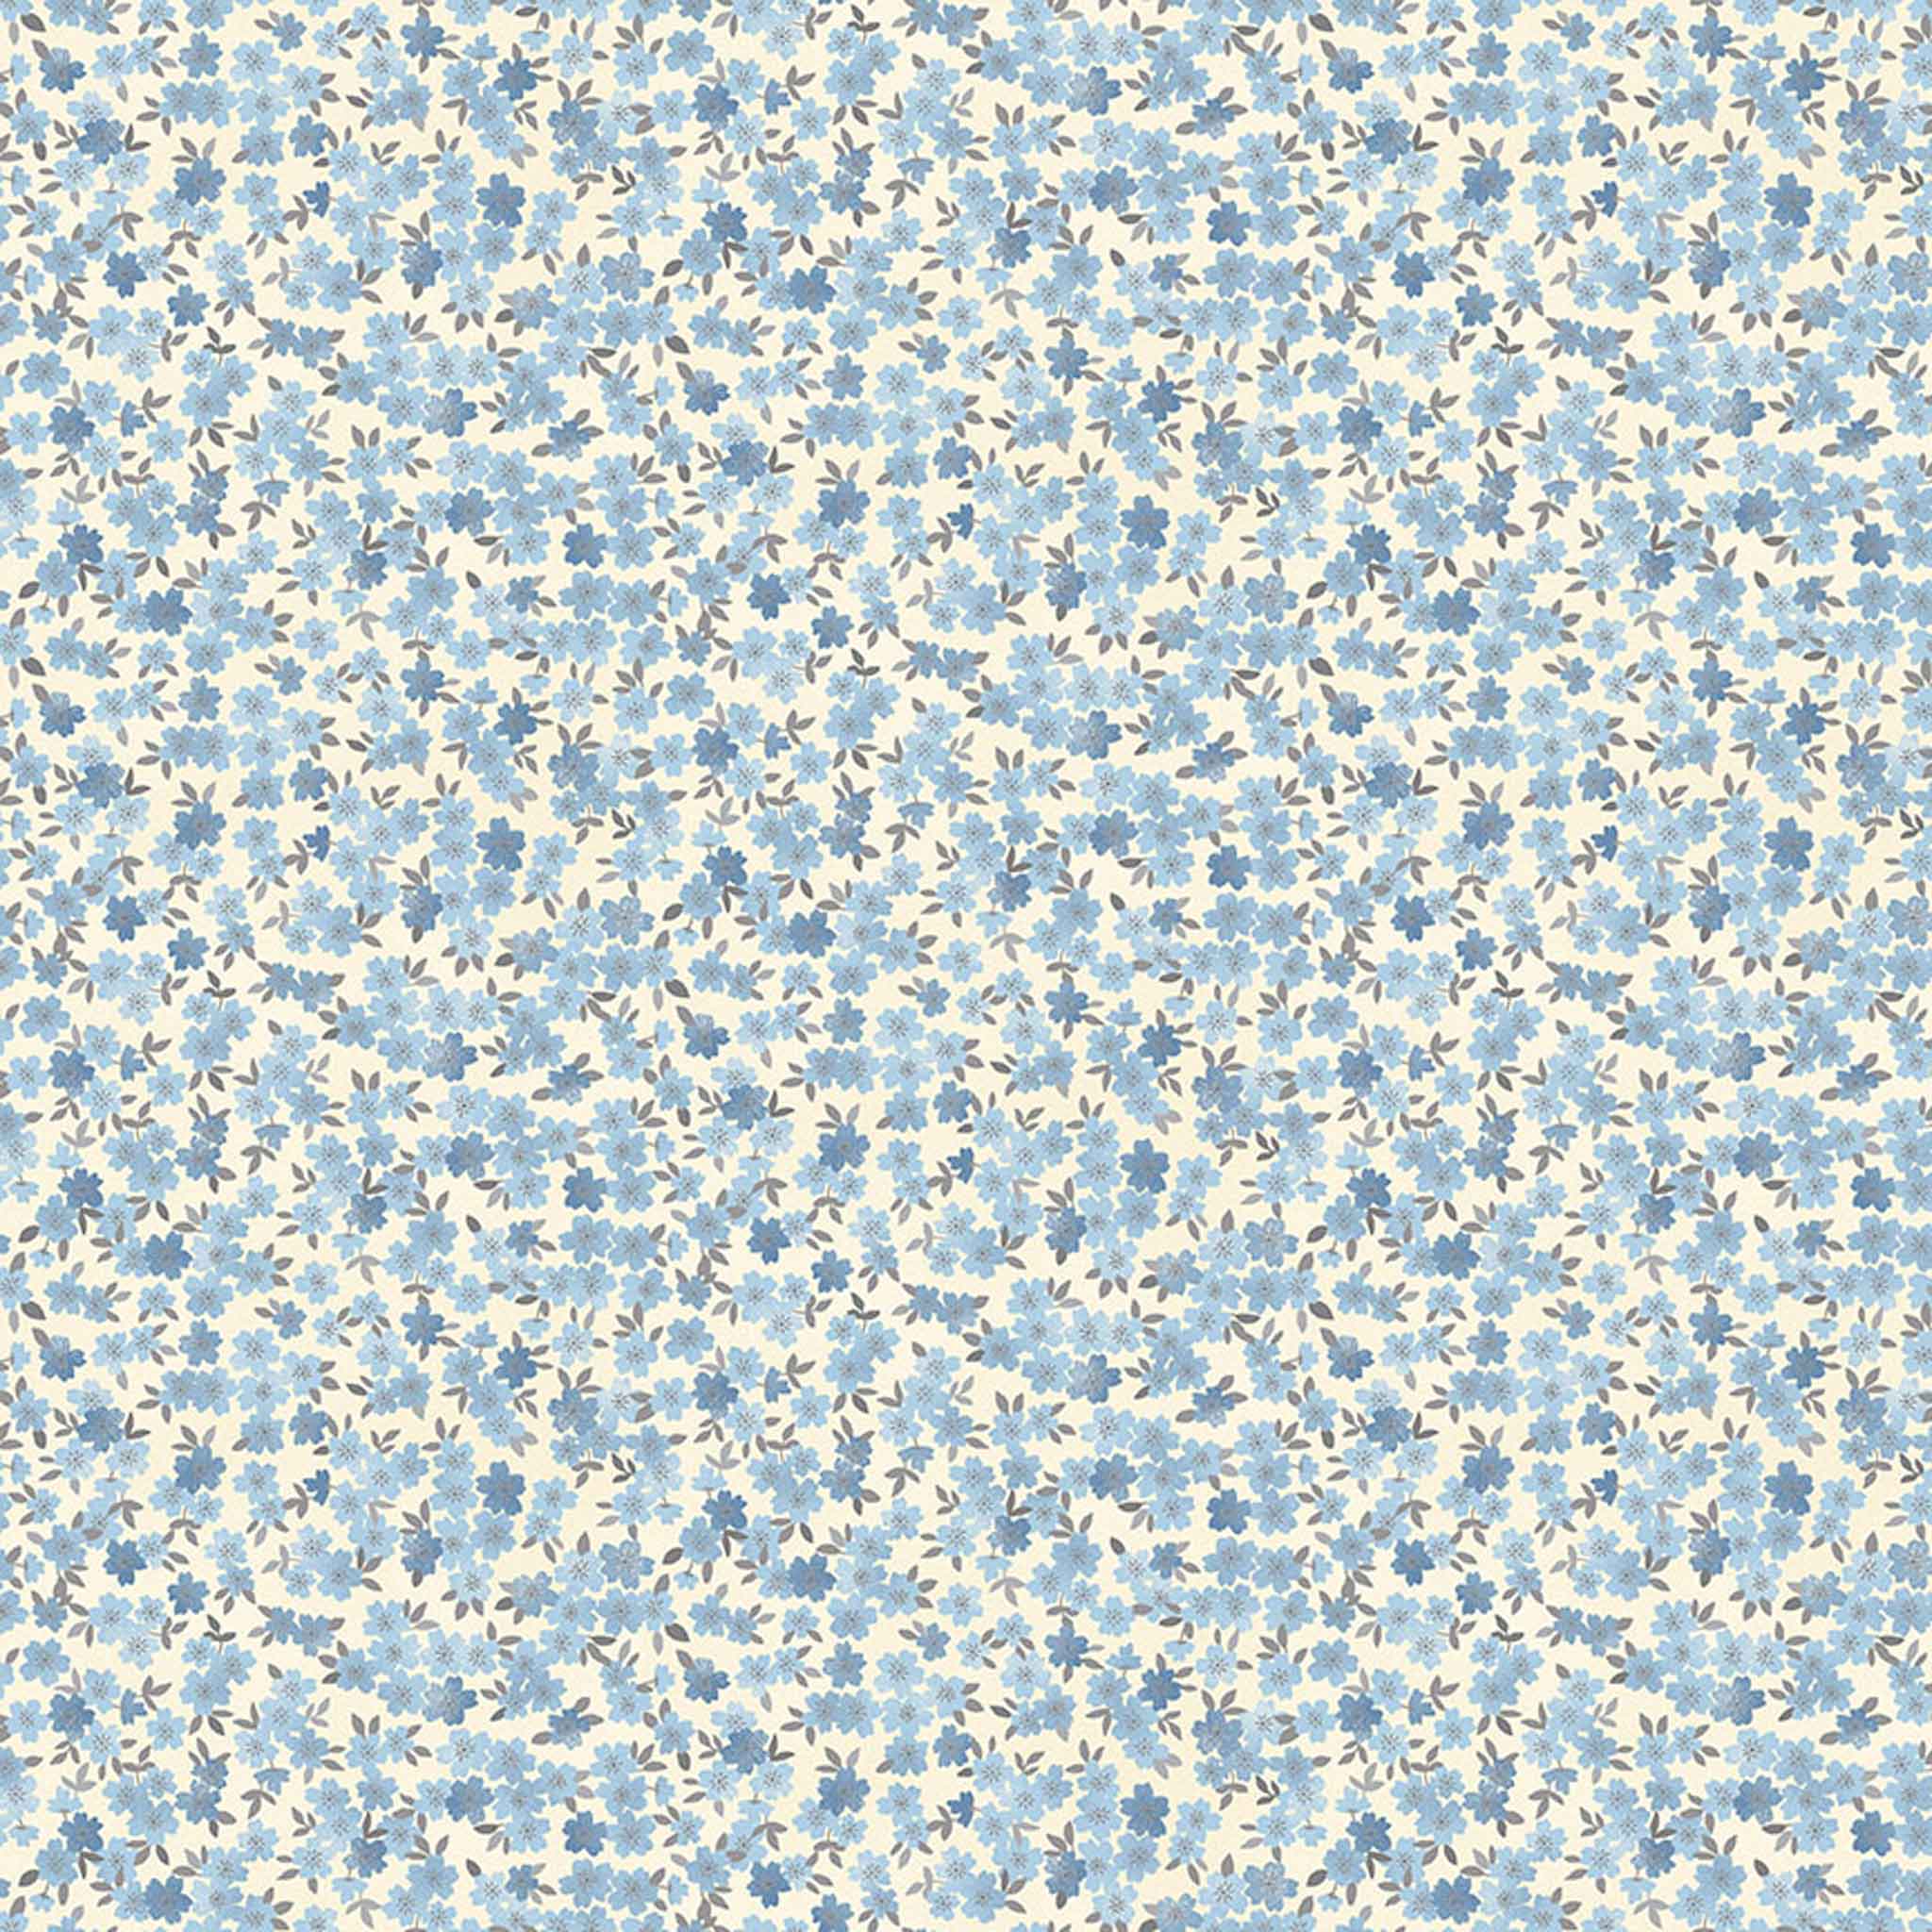 Blossom Cotton Fabric - Blue - Makower 2412/B - Tranquility Collection